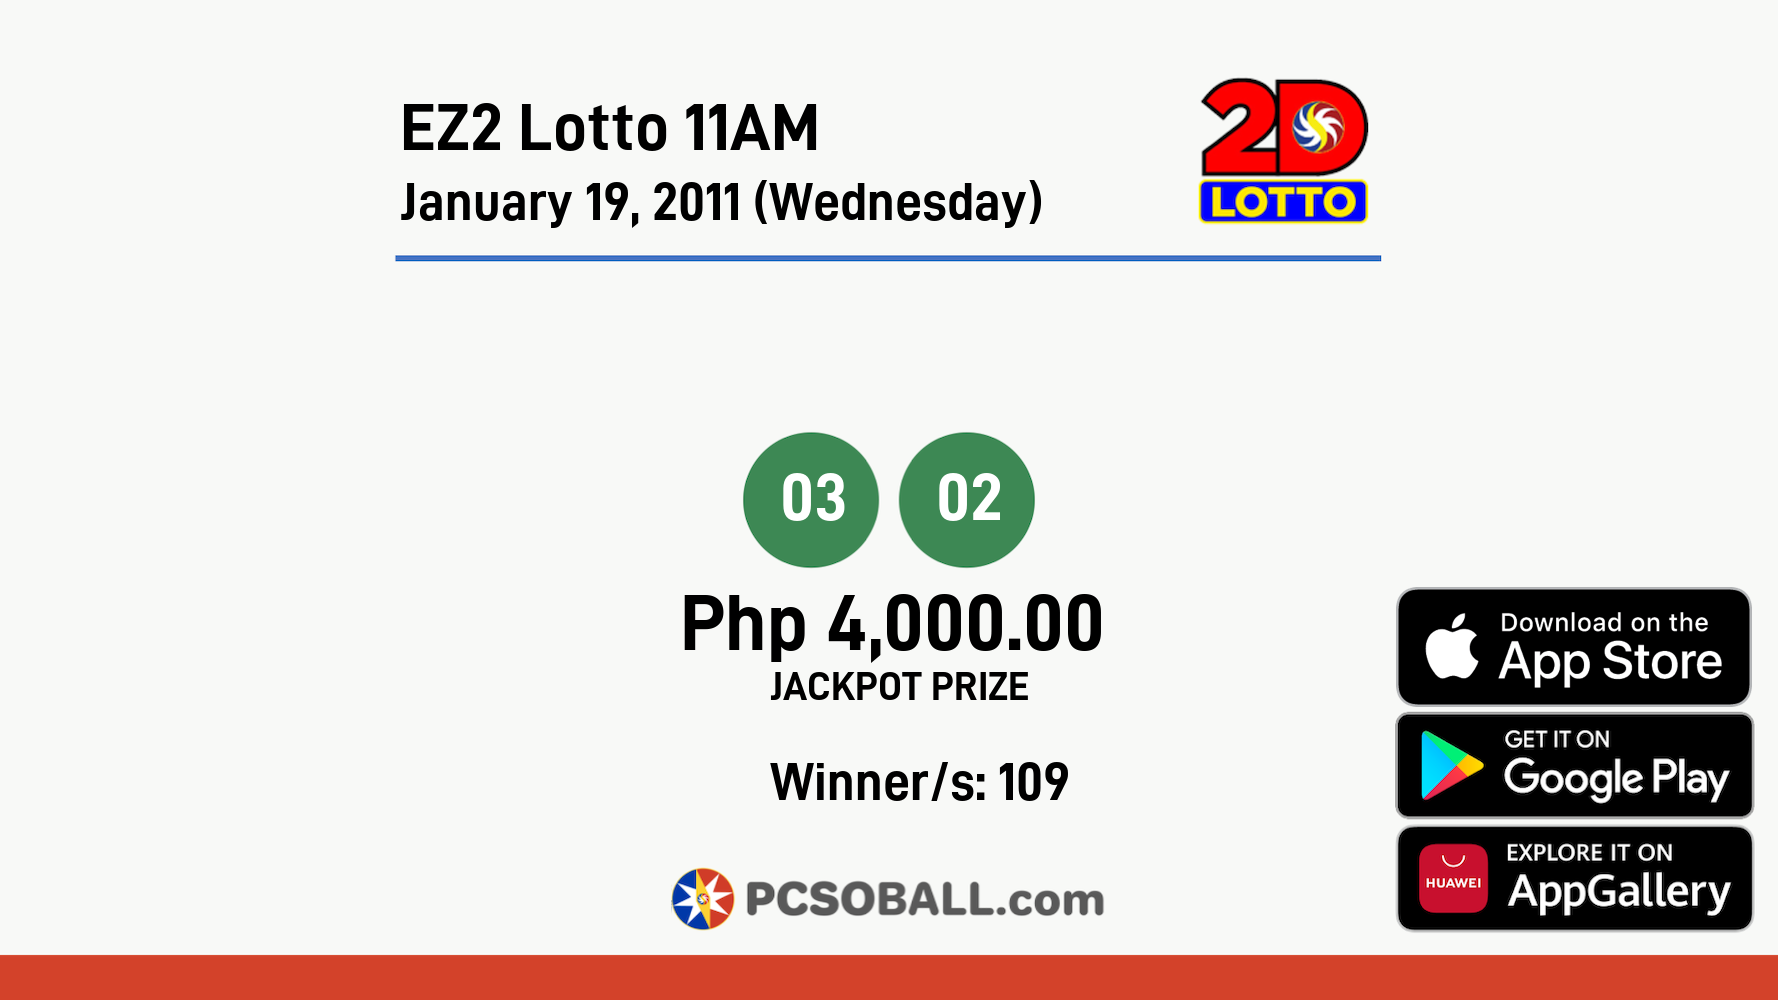 EZ2 Lotto 11AM January 19, 2011 (Wednesday) Result